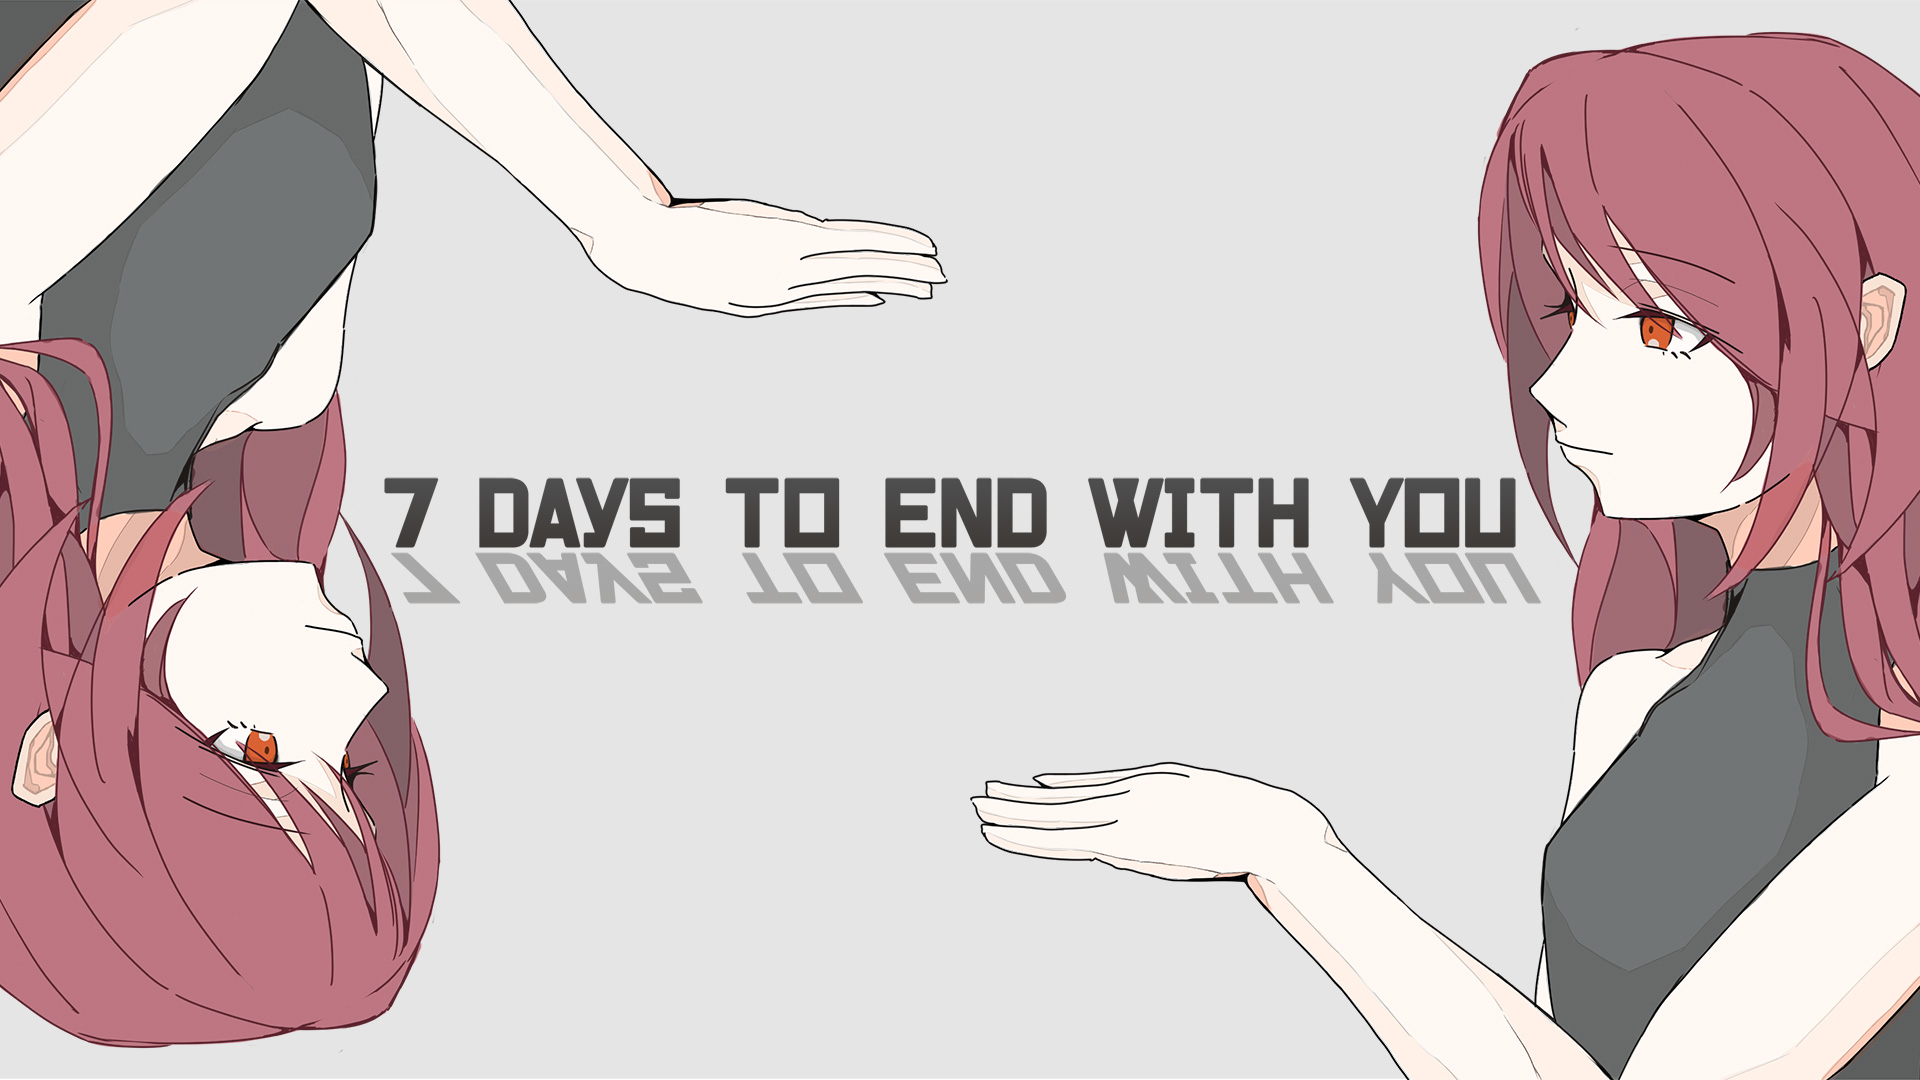 『7 Days to End with You』  「いっせいトライアル」で期間限定遊び放題開始! ニンテンドーe ショップセールも初参加!